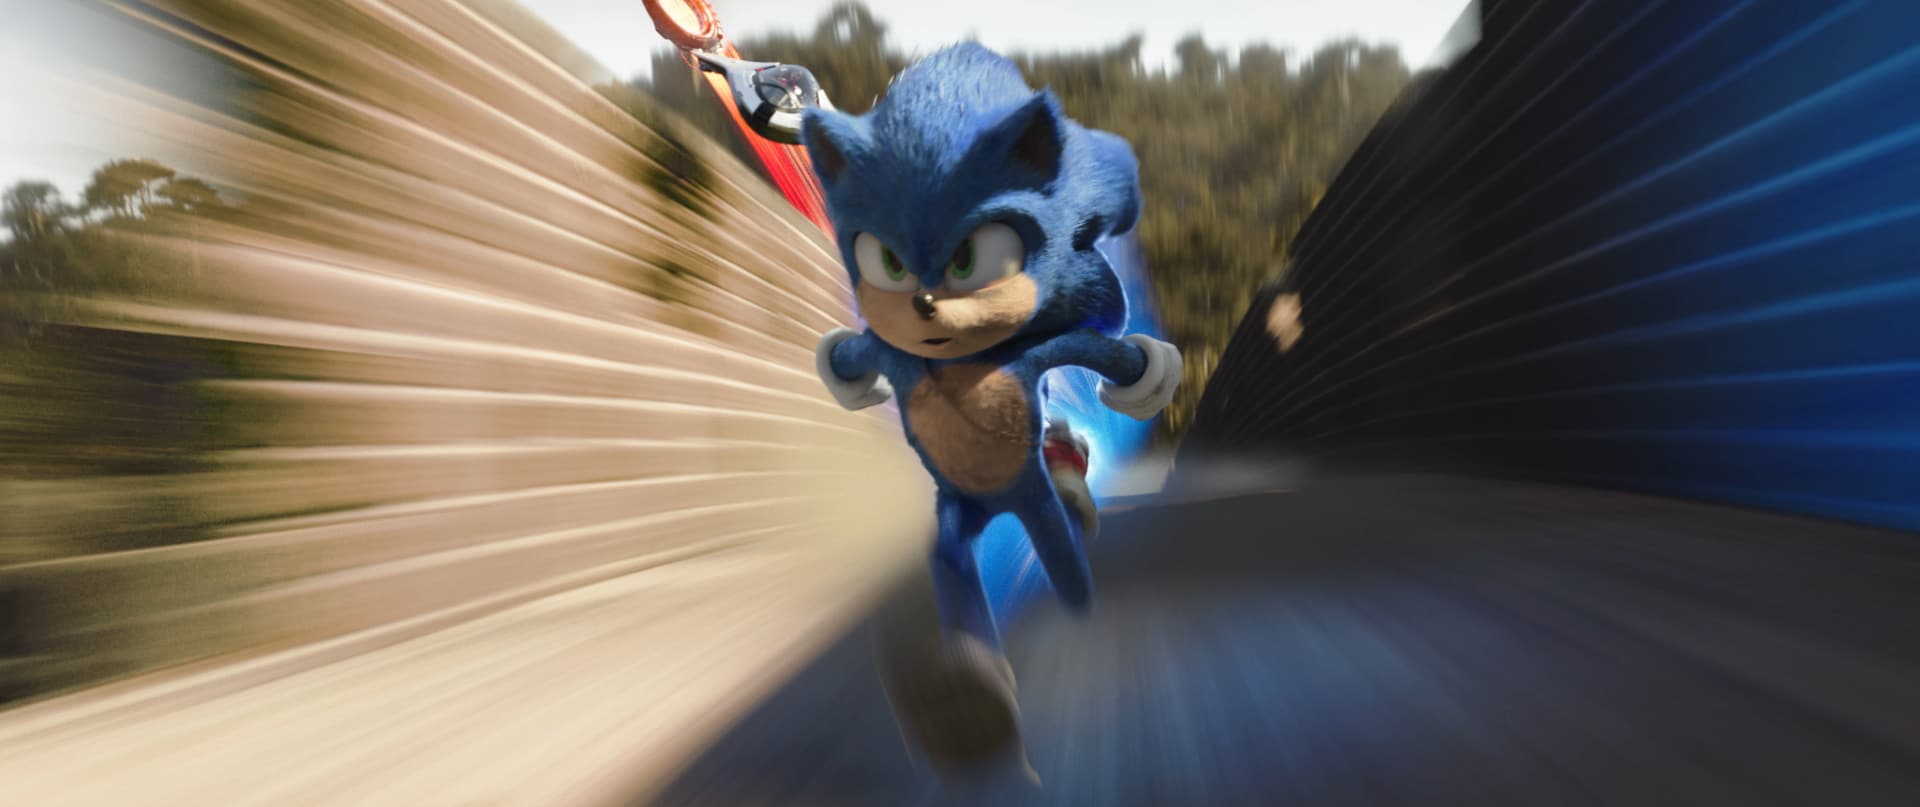 Sonic The Hedgehog is out of this world